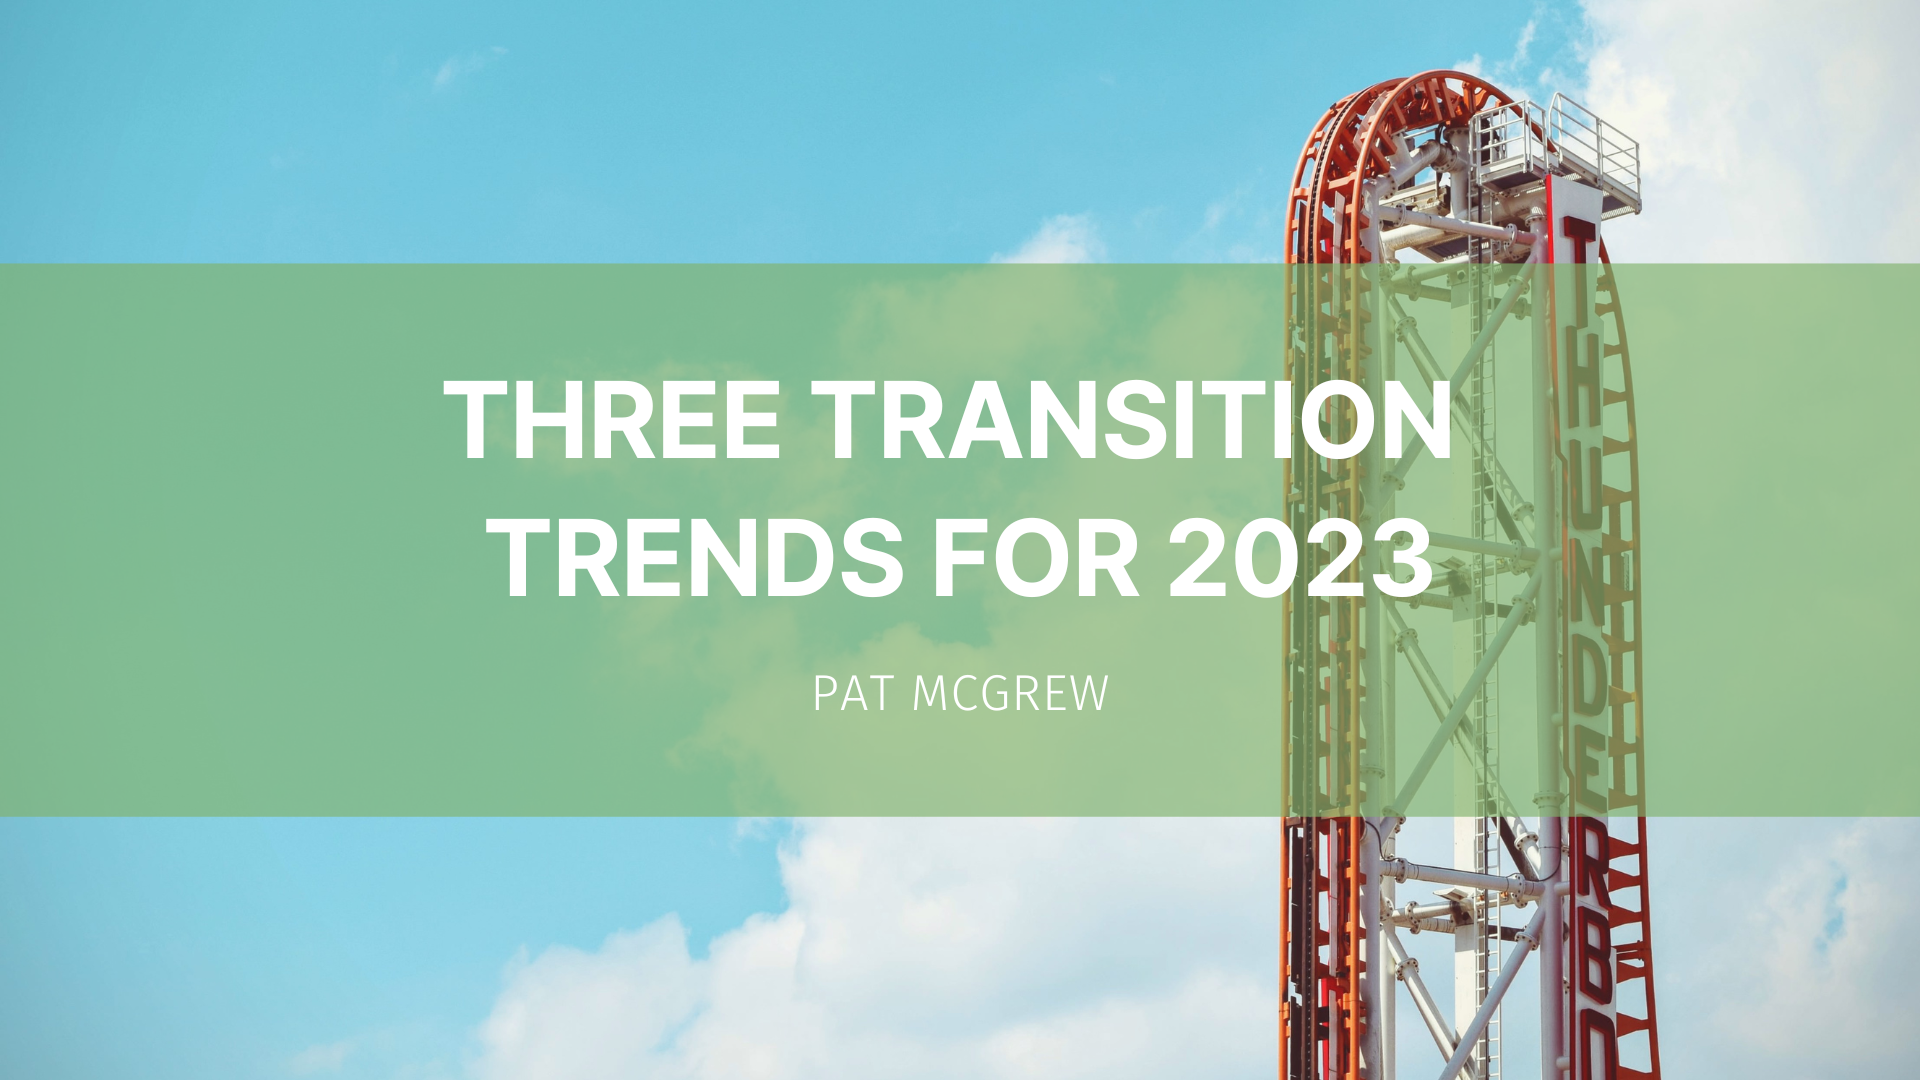 Featured image for “Three transition trends for 2023”